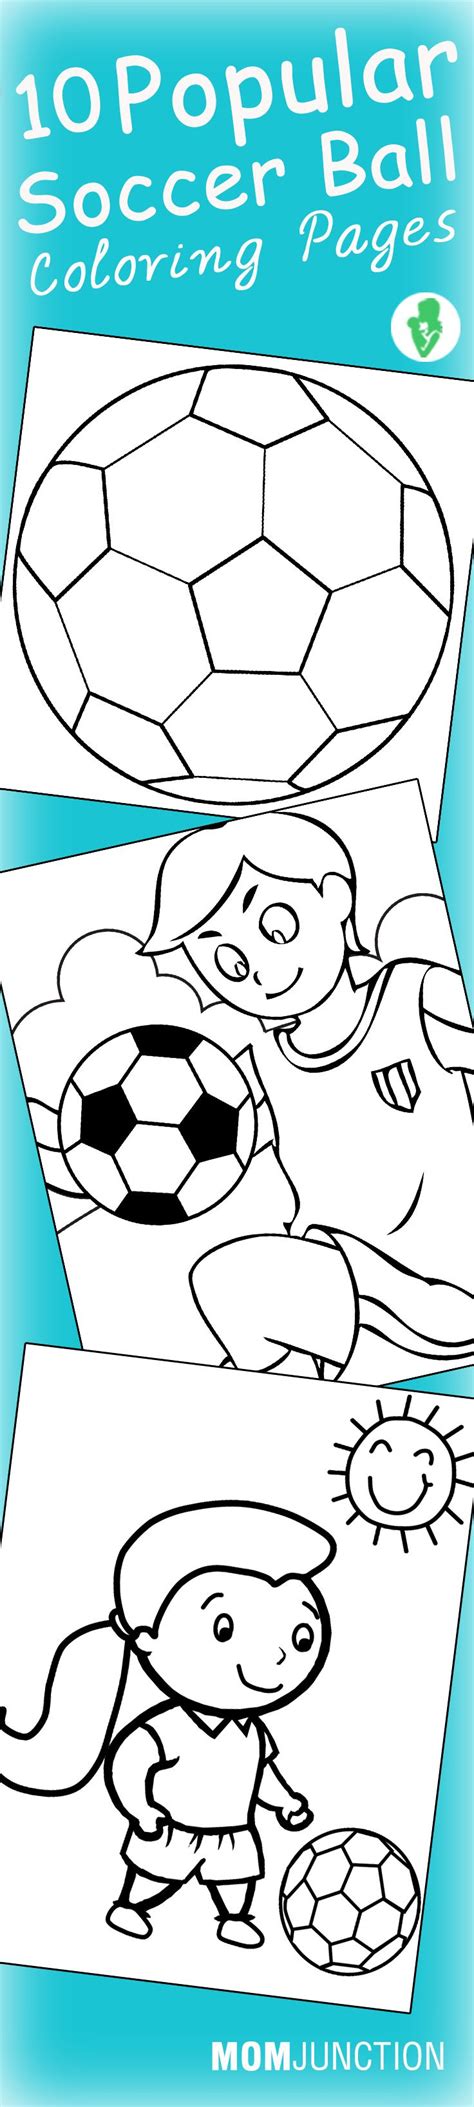 popular soccer ball coloring pages  soccer lover kids soccer camp